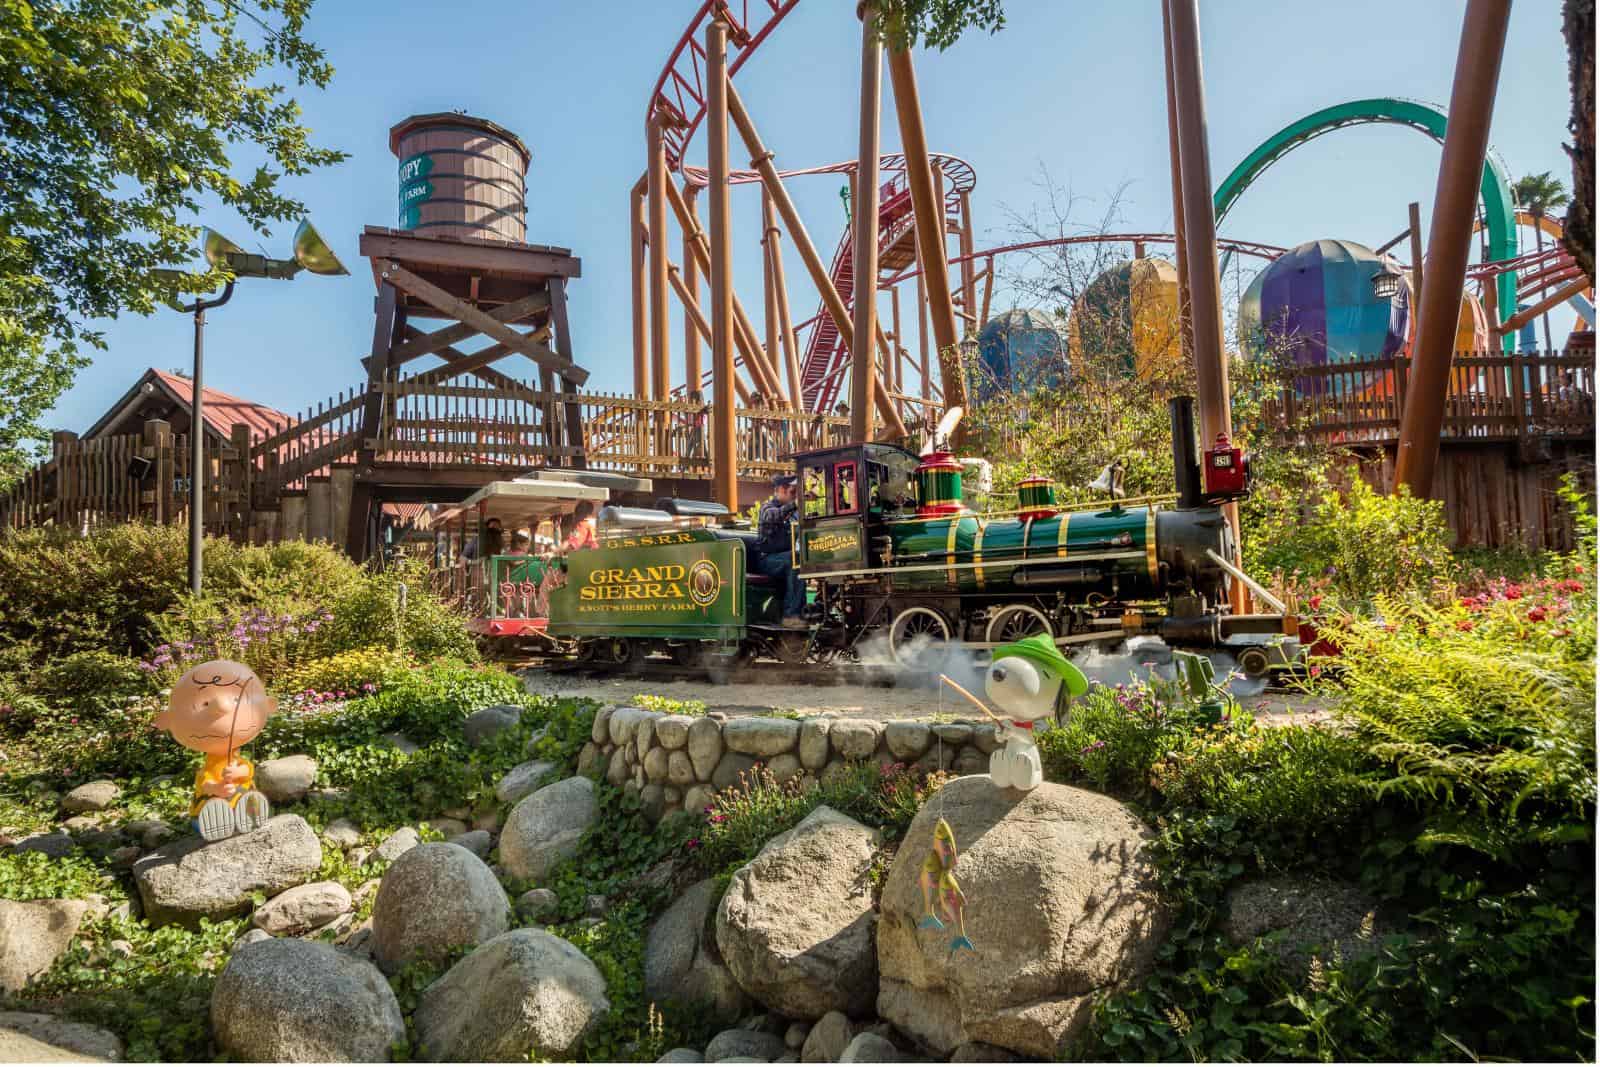 Best Knotts Berry Farm Rides for Toddlers